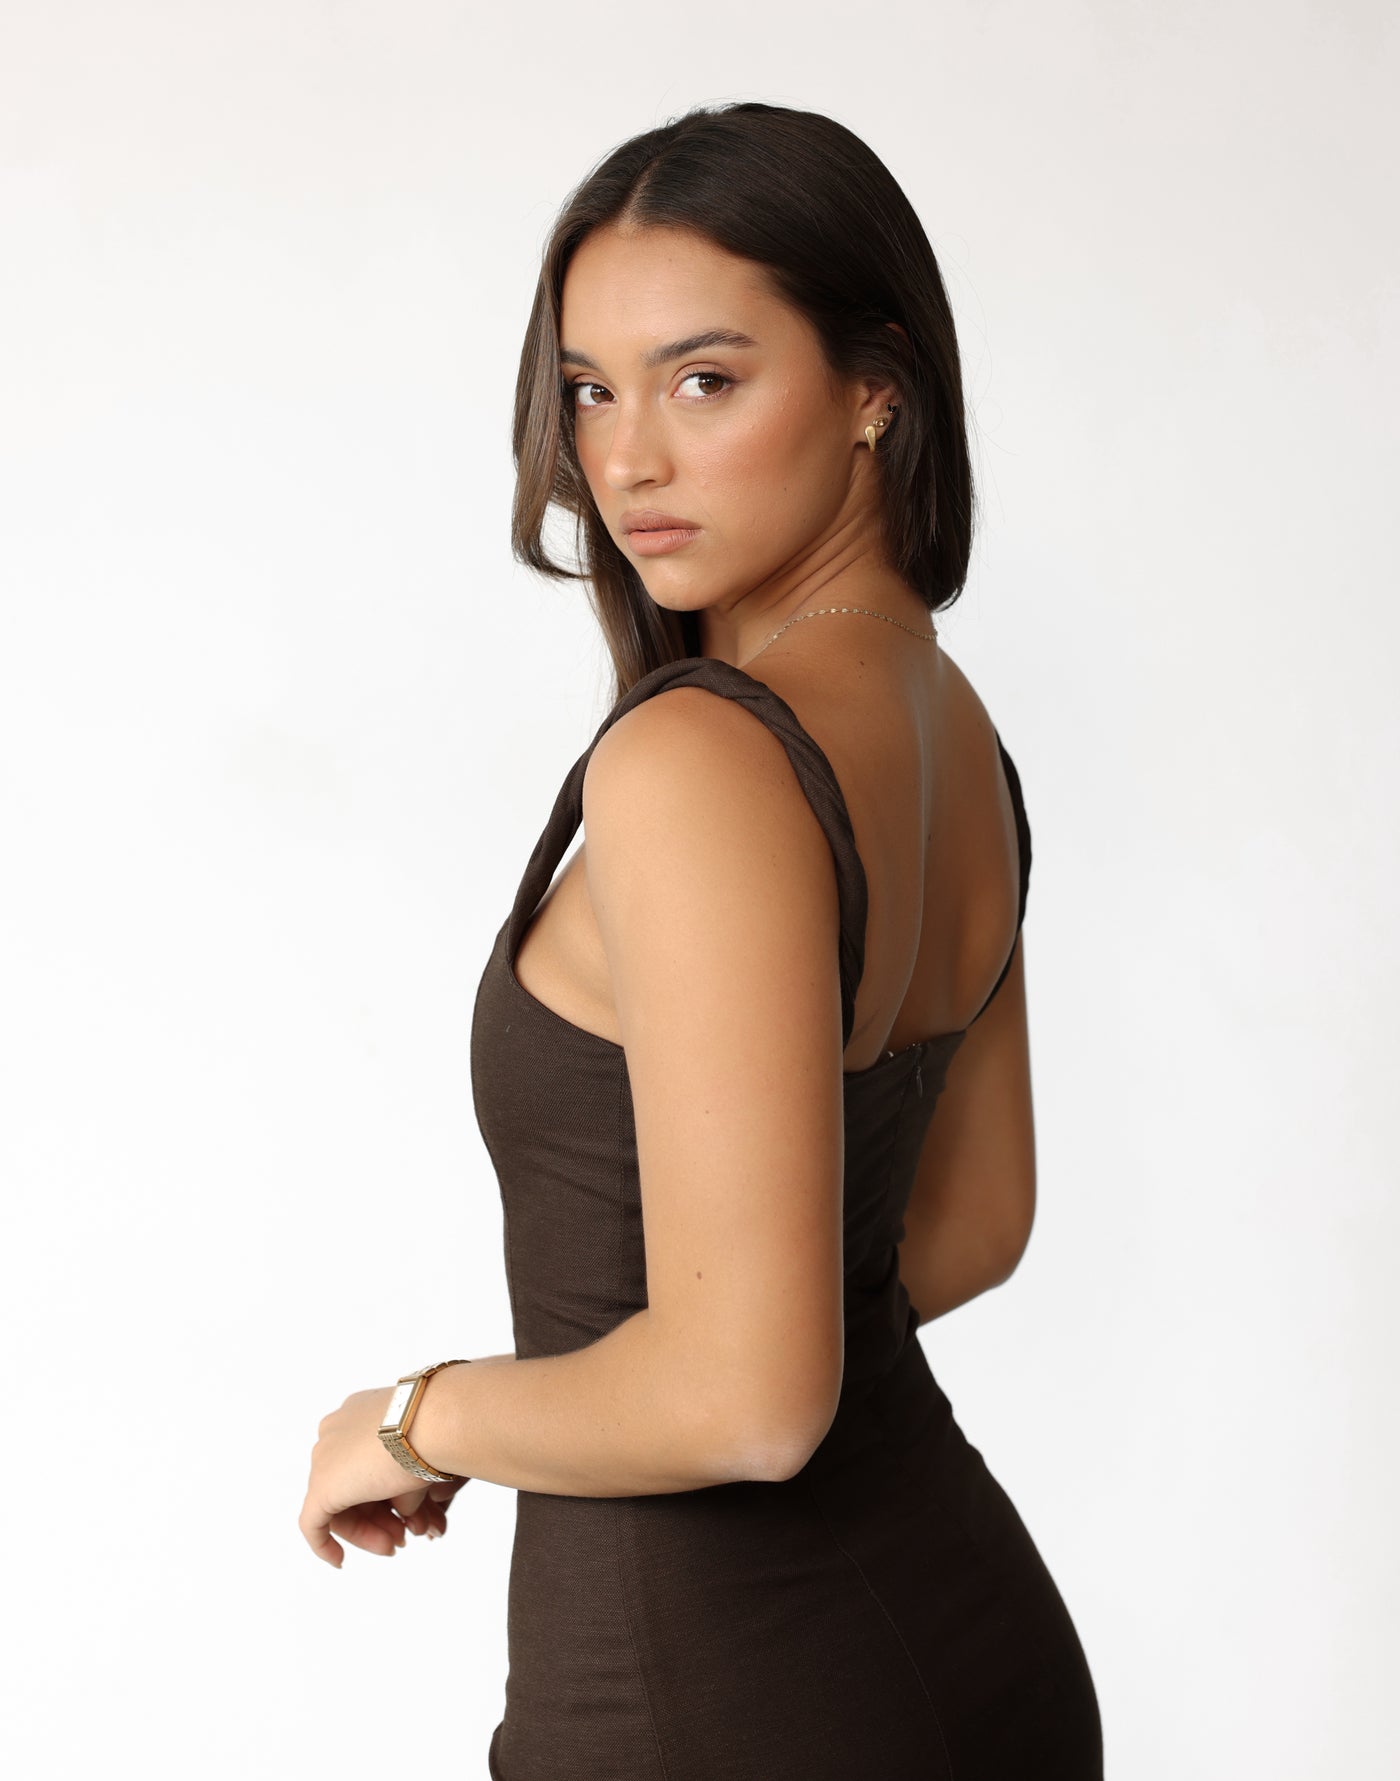 Bacalar Mini Dress (Chocolate) | Charcoal Clothing Exclusive - Twisted Strap Straight Neck Mini Dress - Women's Dress - Charcoal Clothing